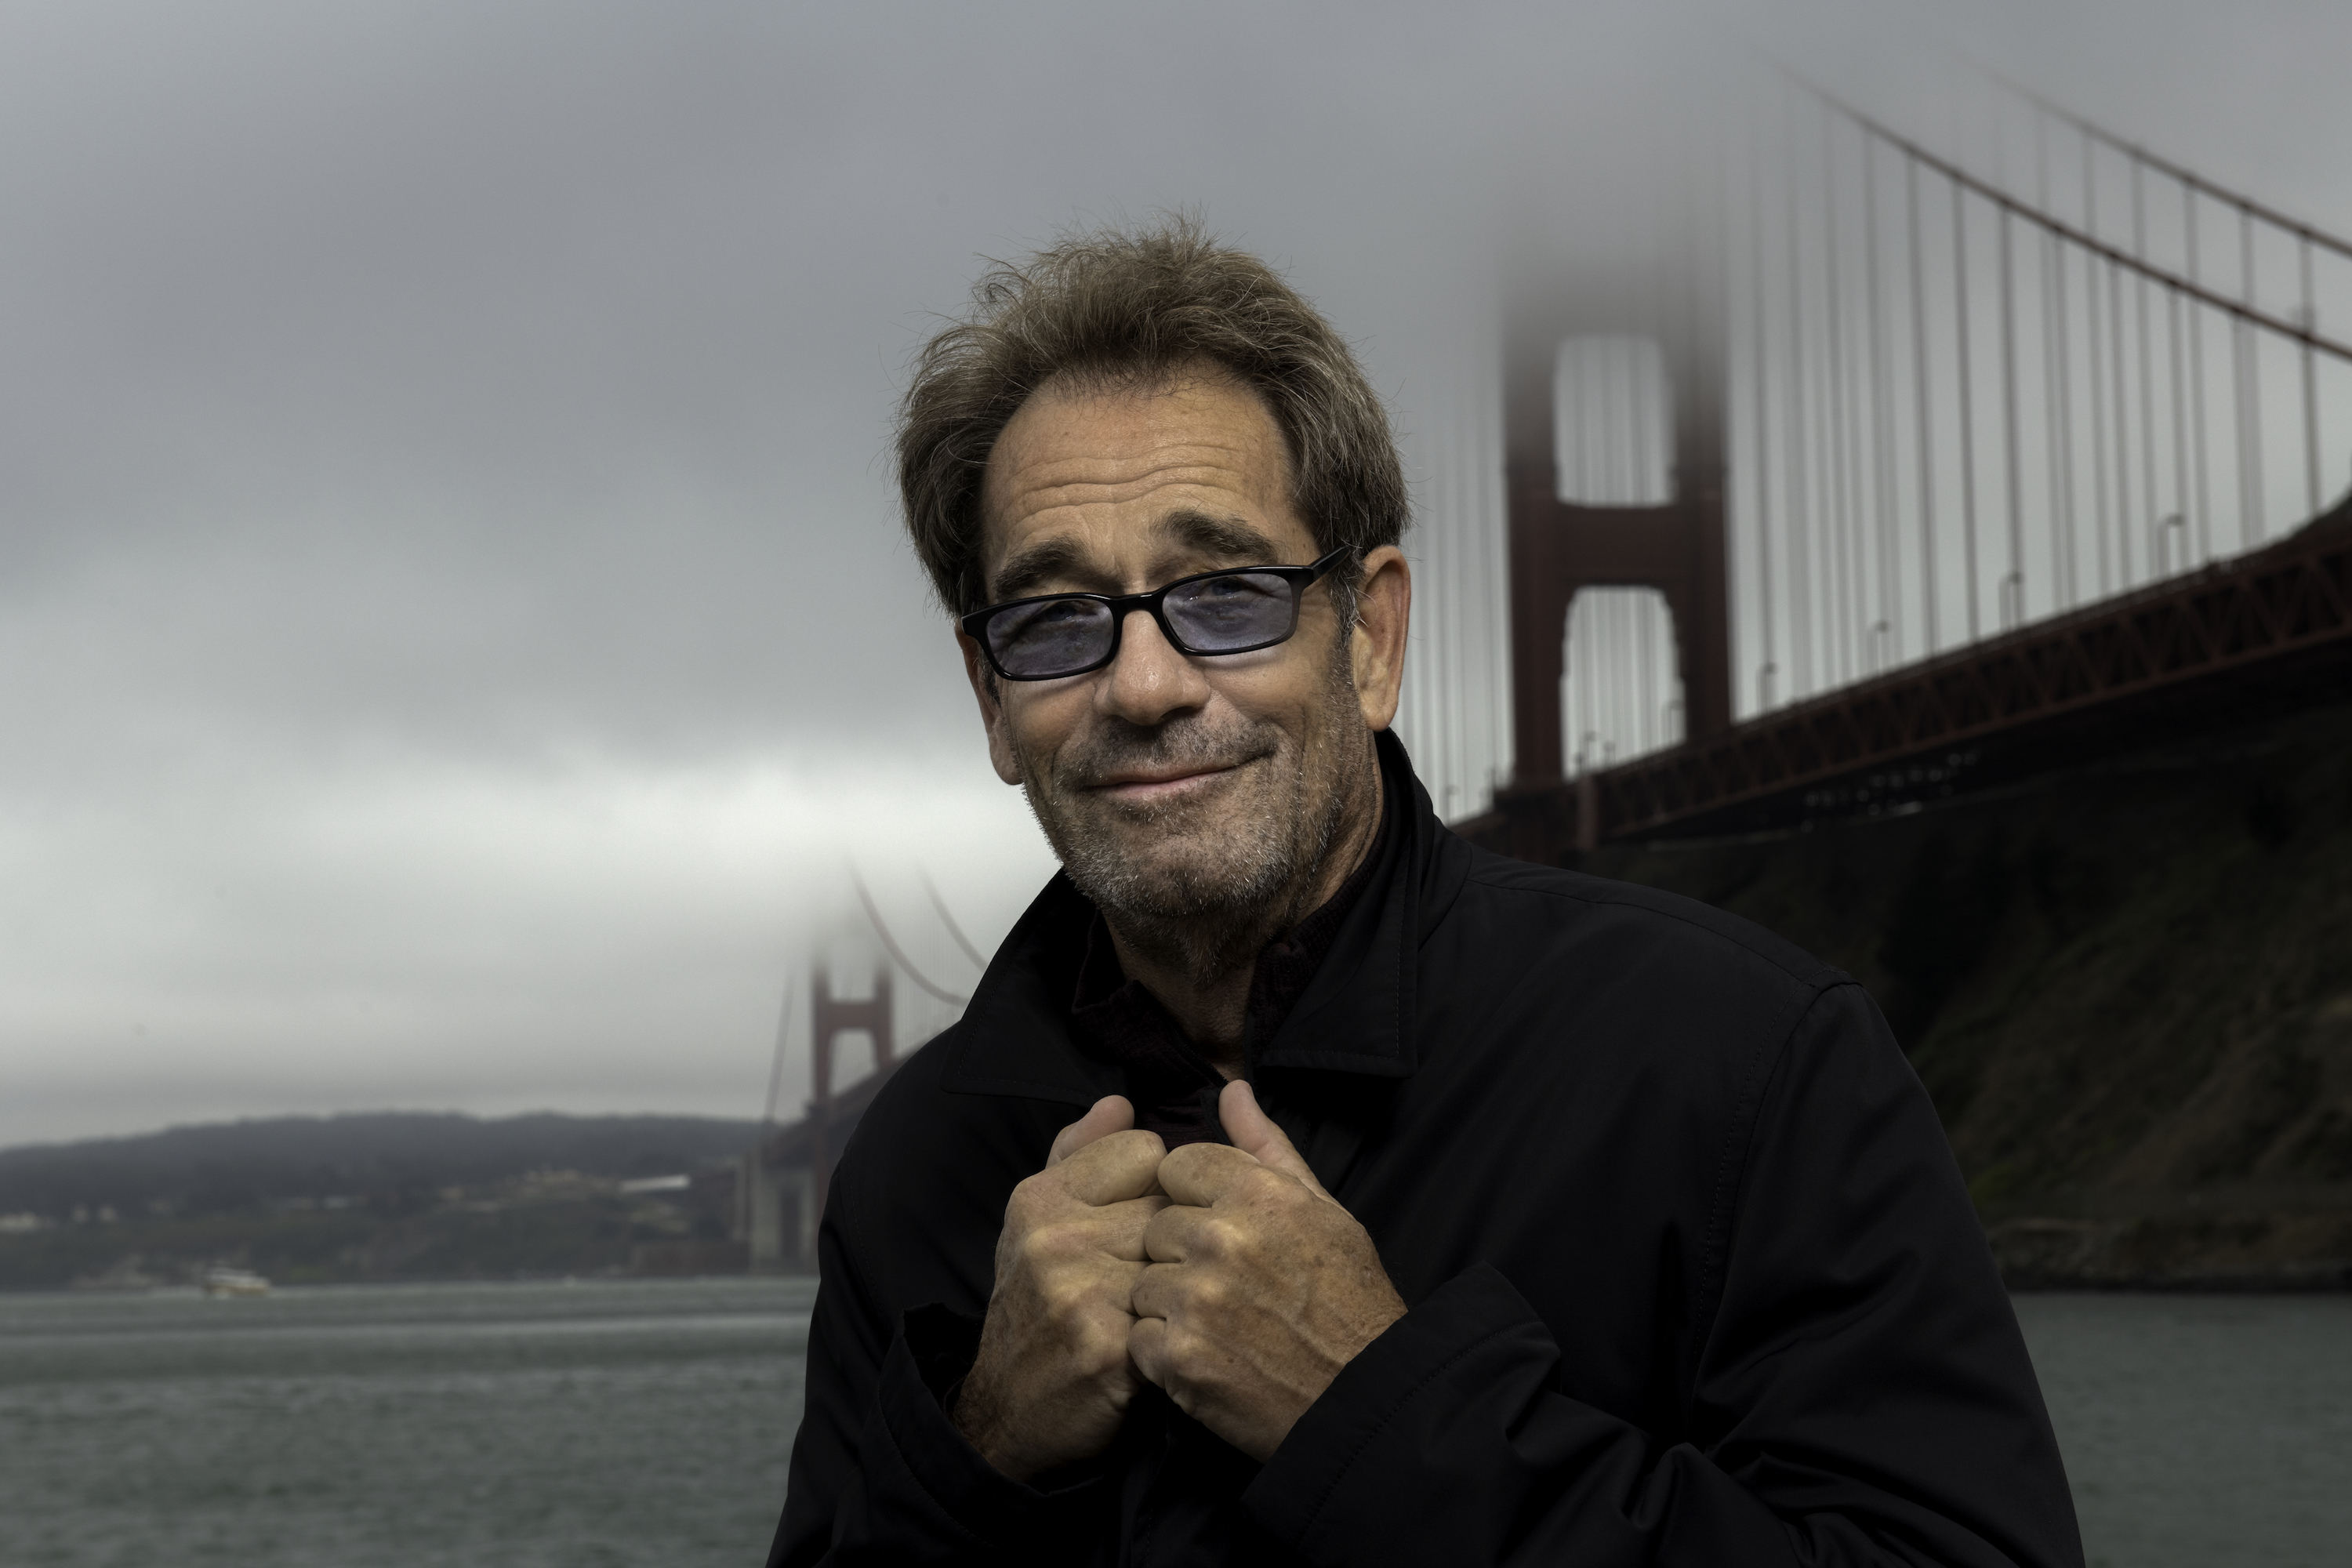 Huey Lewis on Ménière’s Disease, Jamming with the Dead, Writing for Willie Nelson